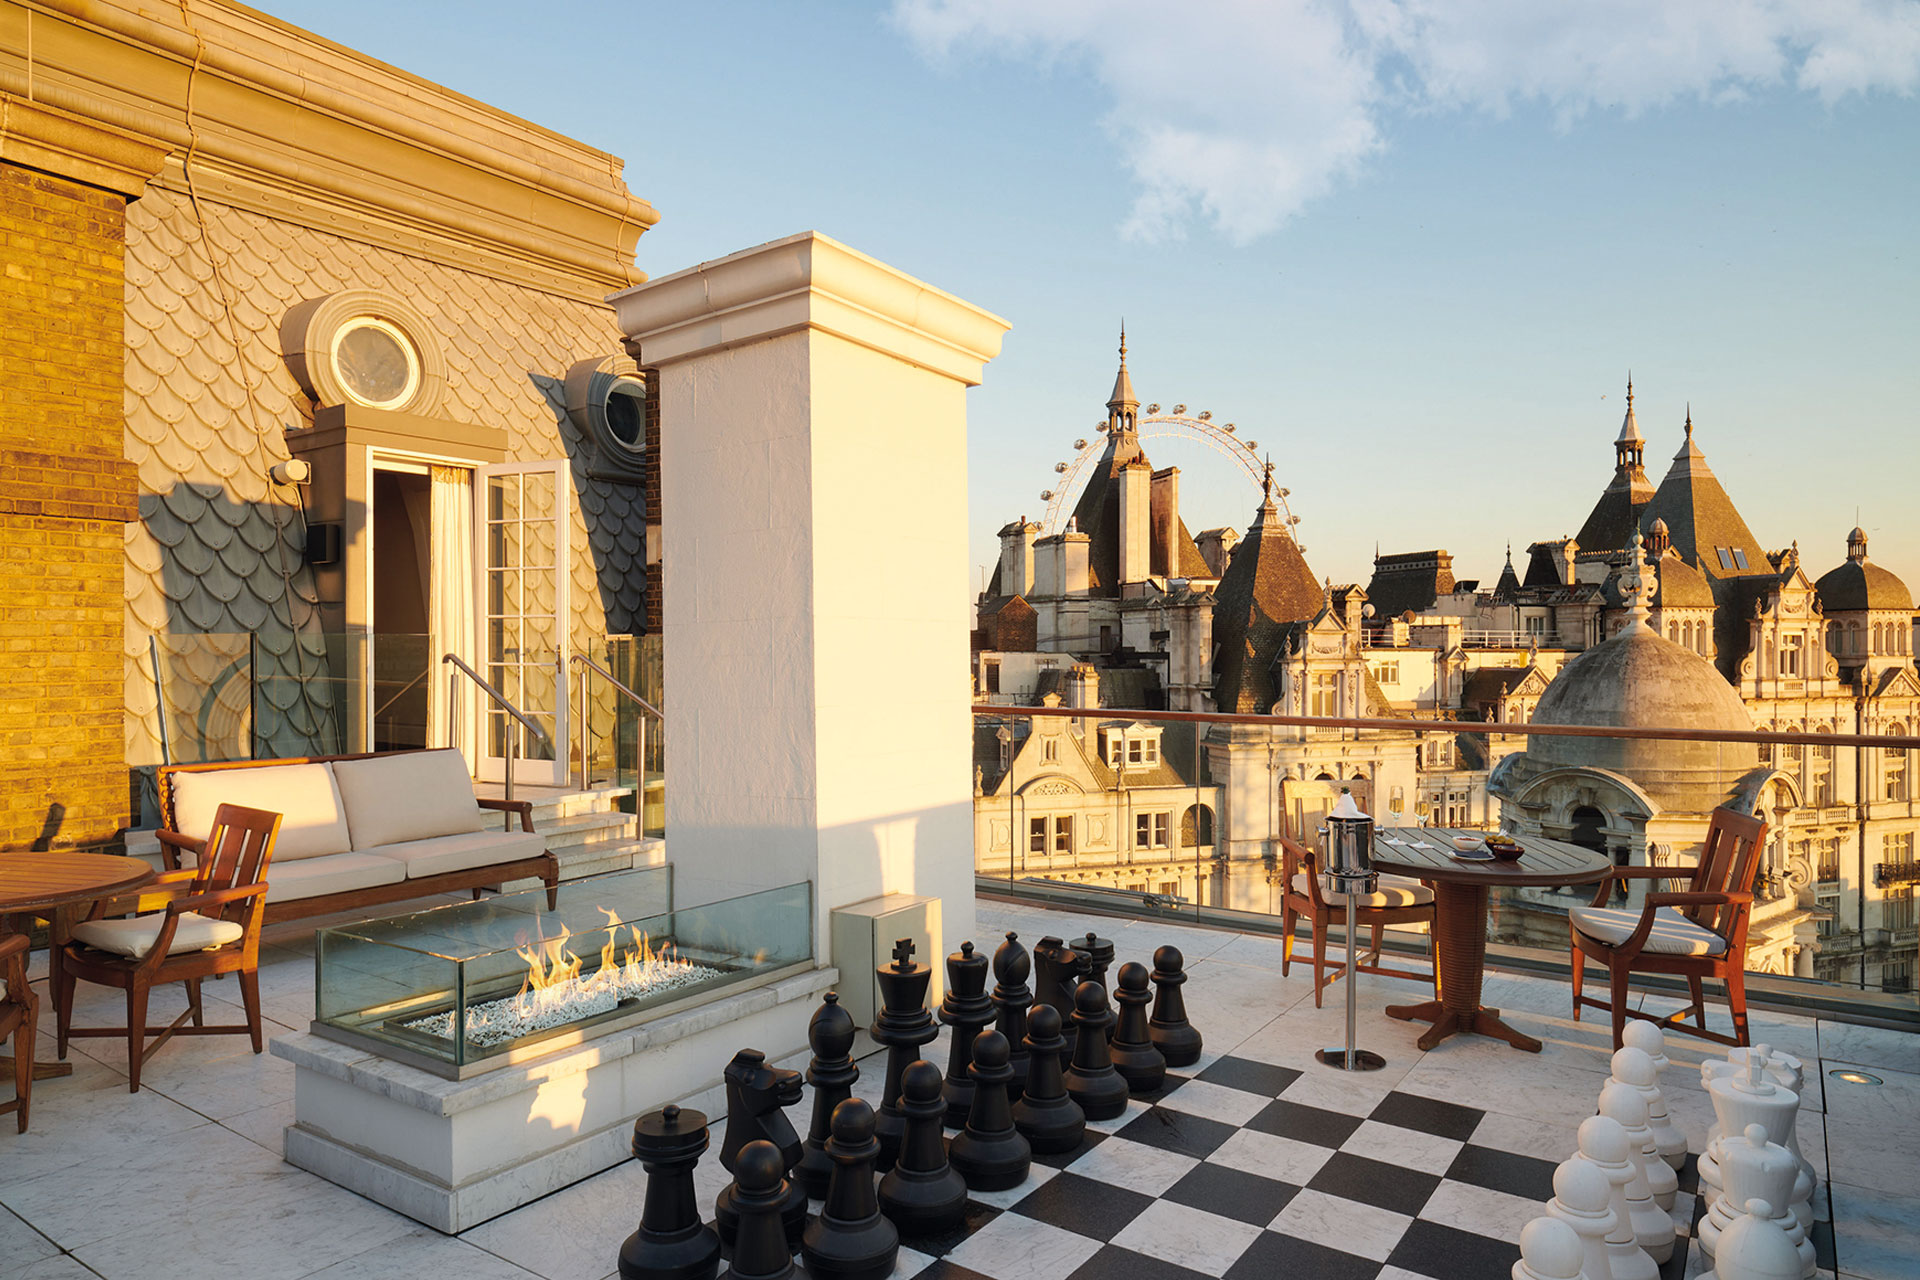 The skyline of London as seen from a rooftop, giant chess pieces